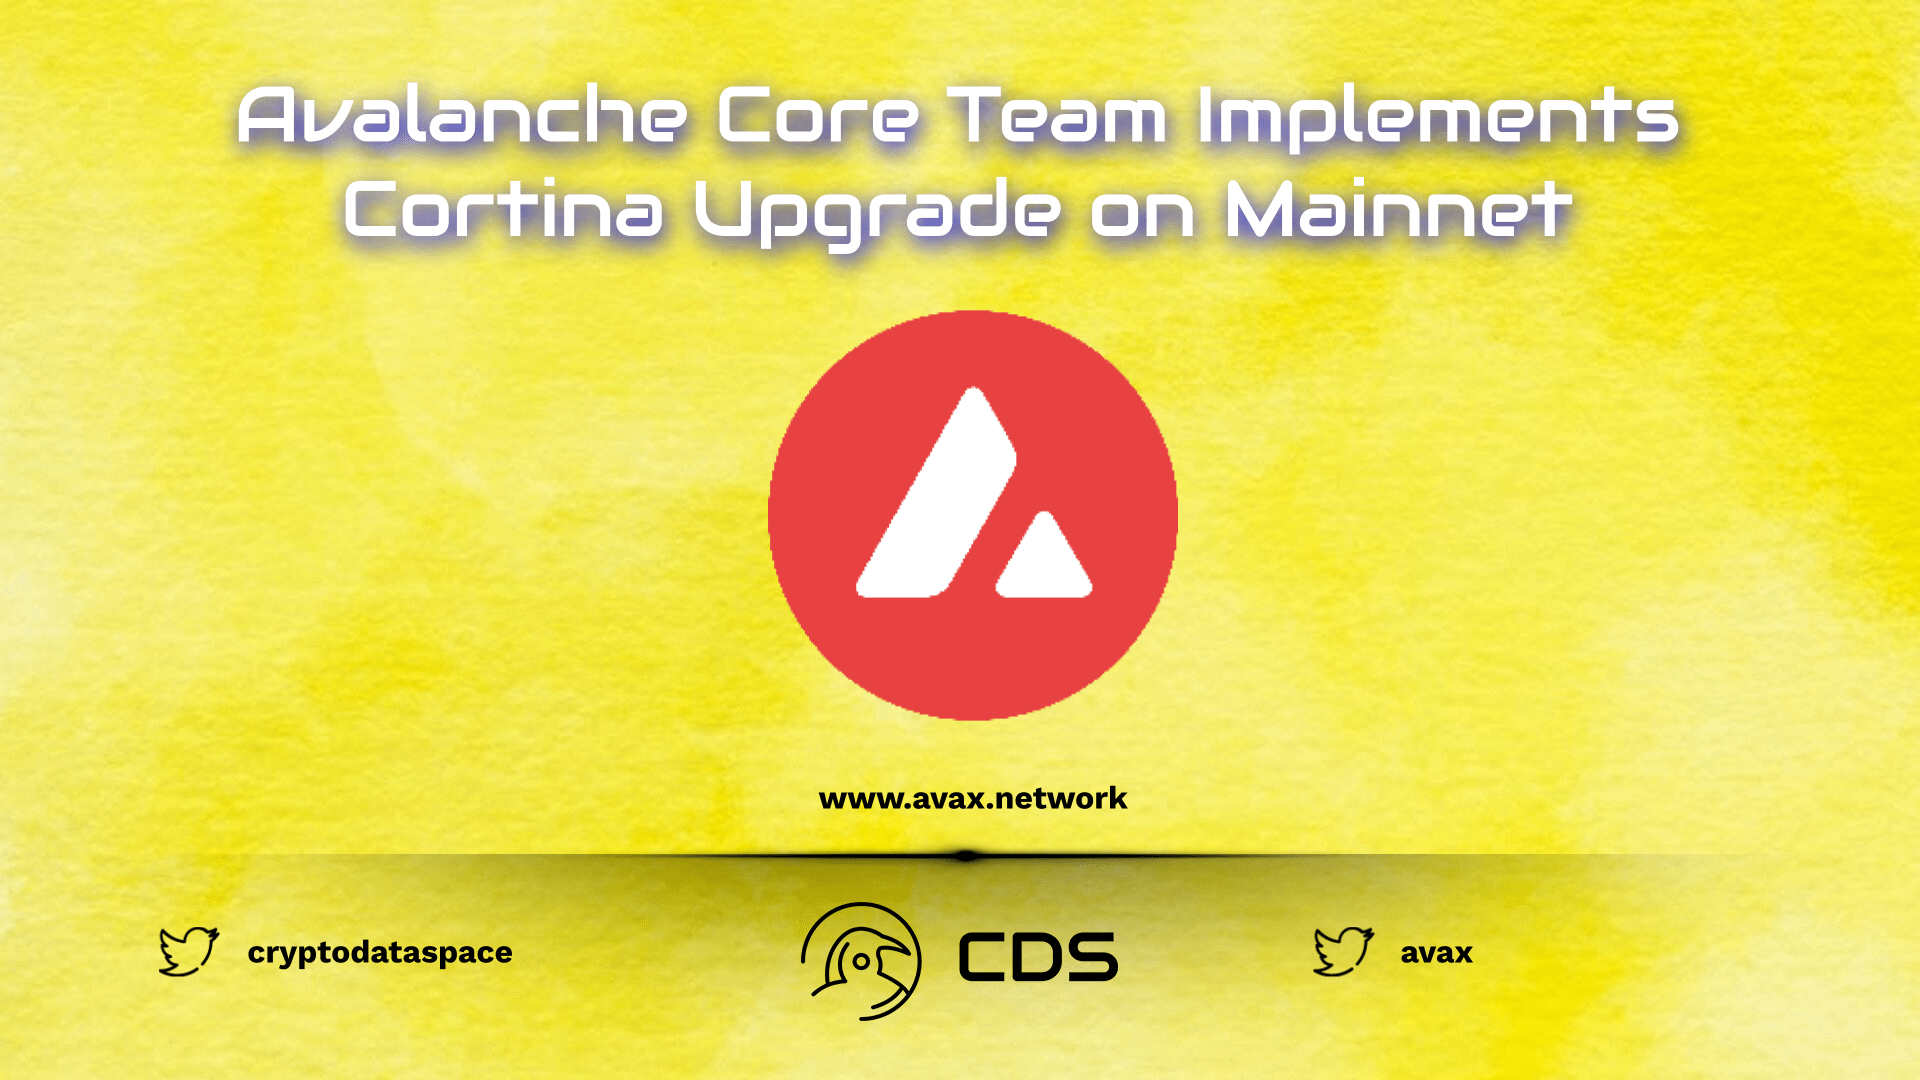 Avalanche Core Team Implements Cortina Upgrade on Mainnet